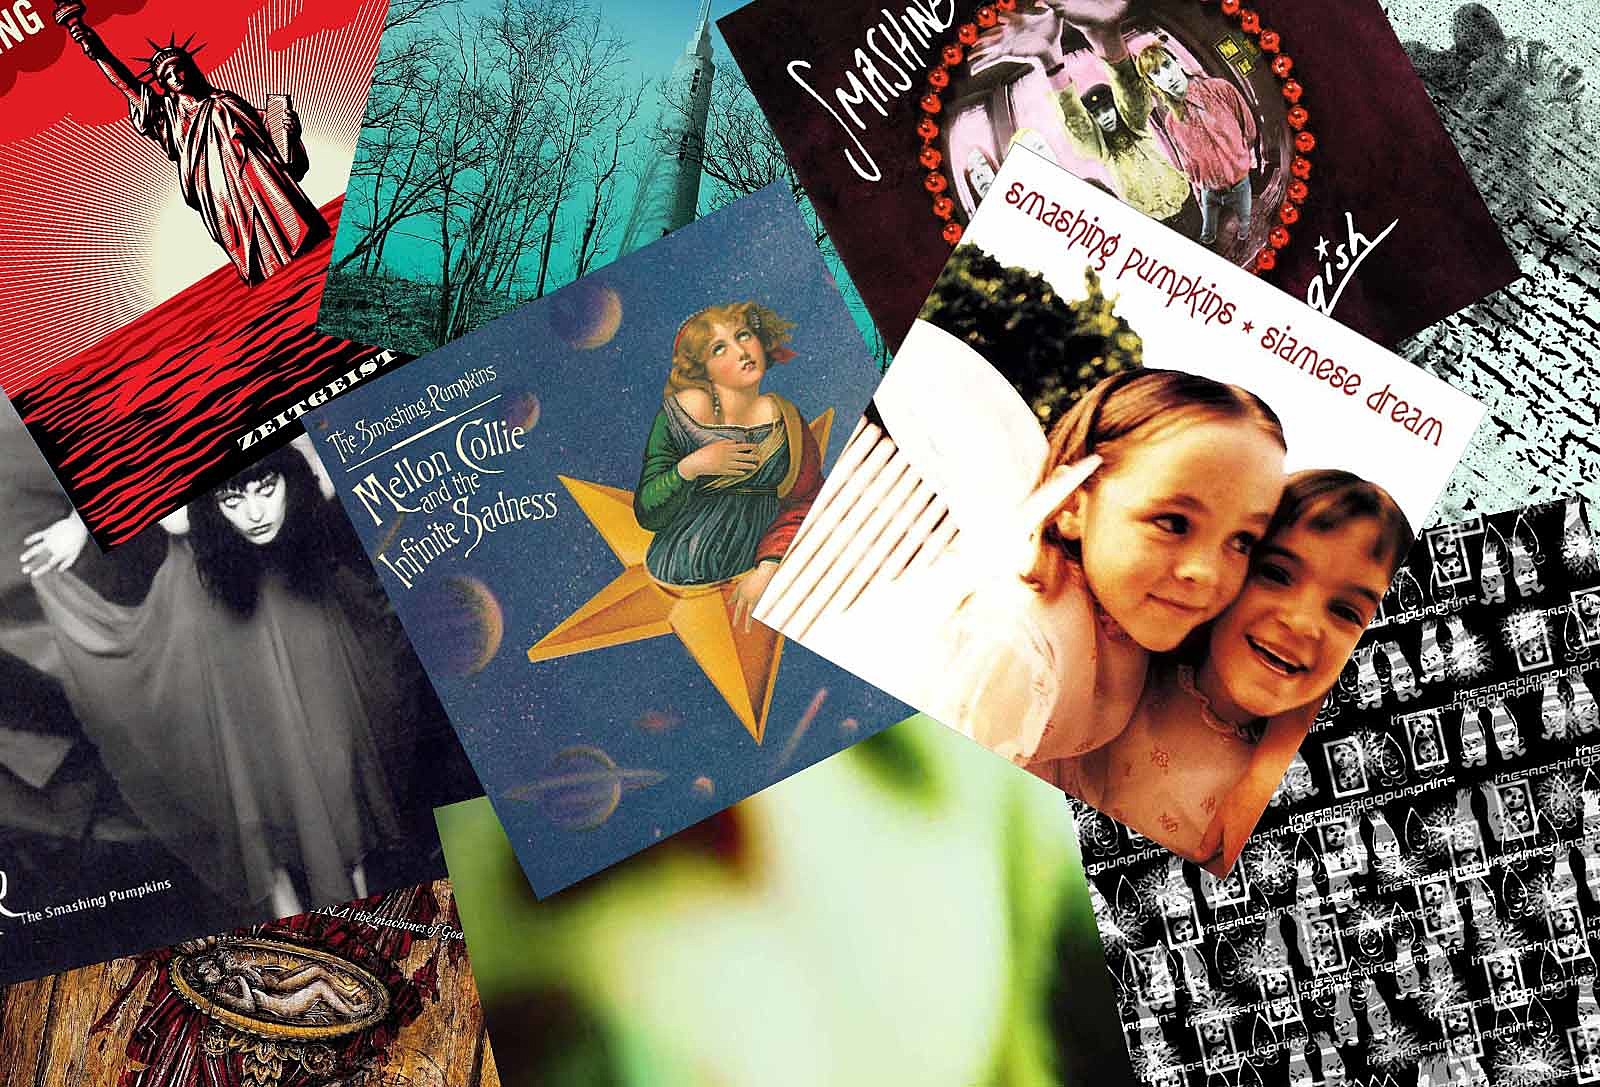 Smashing Pumpkins Albums Ranked in Order of Awesomeness